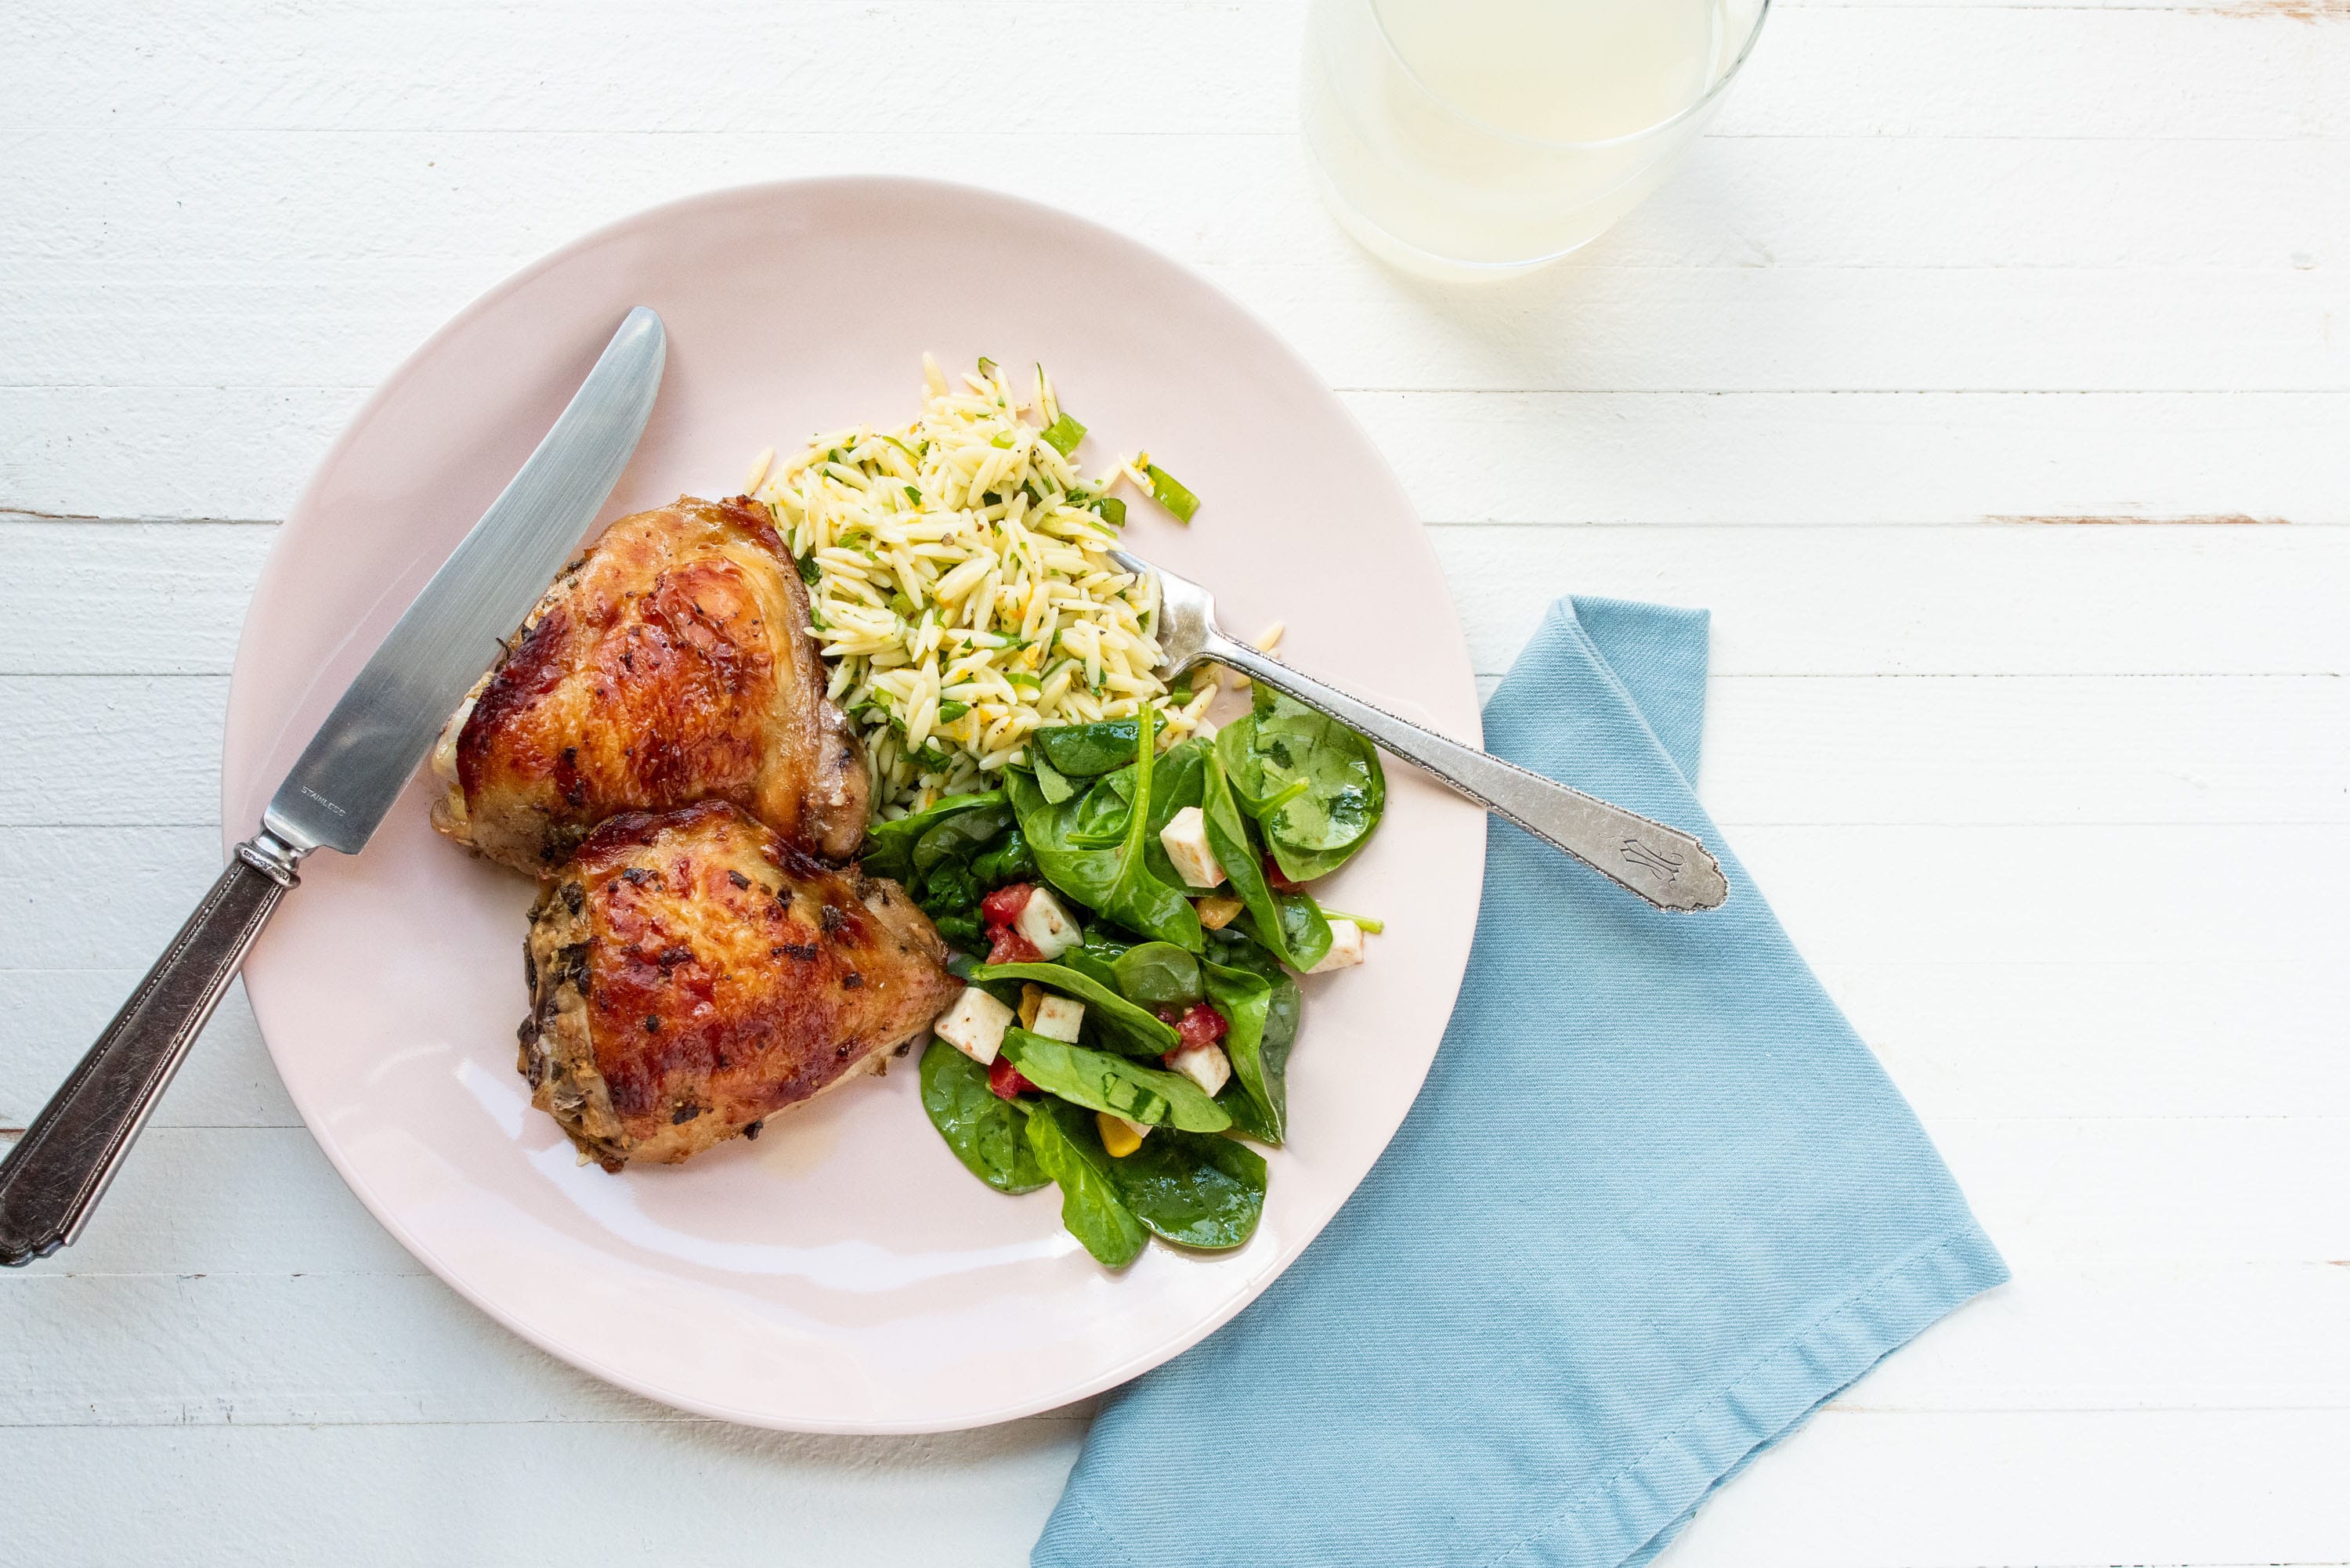 Greek Roasted Chicken Thighs on plate with orzo side and green leafy salad.